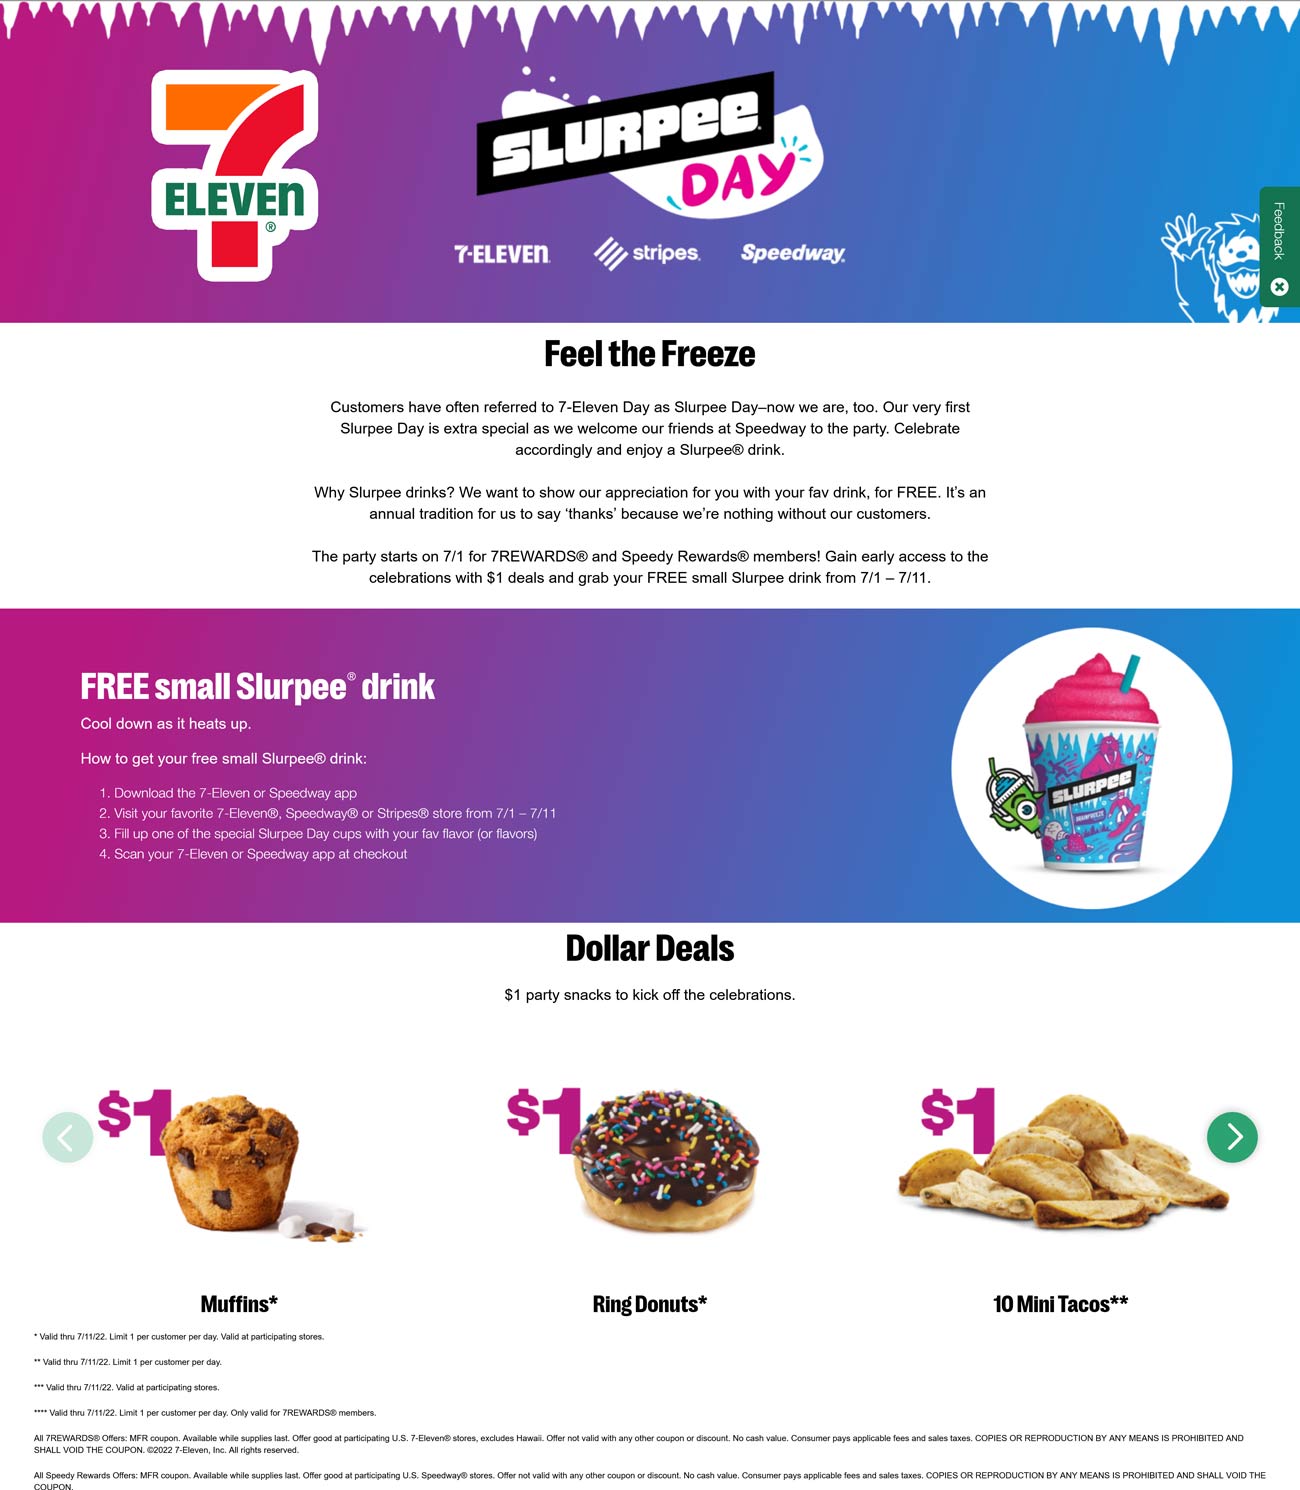 7-Eleven restaurants Coupon  Free slurpee drink day the 11th at 7-Eleven and Speedway #7eleven 